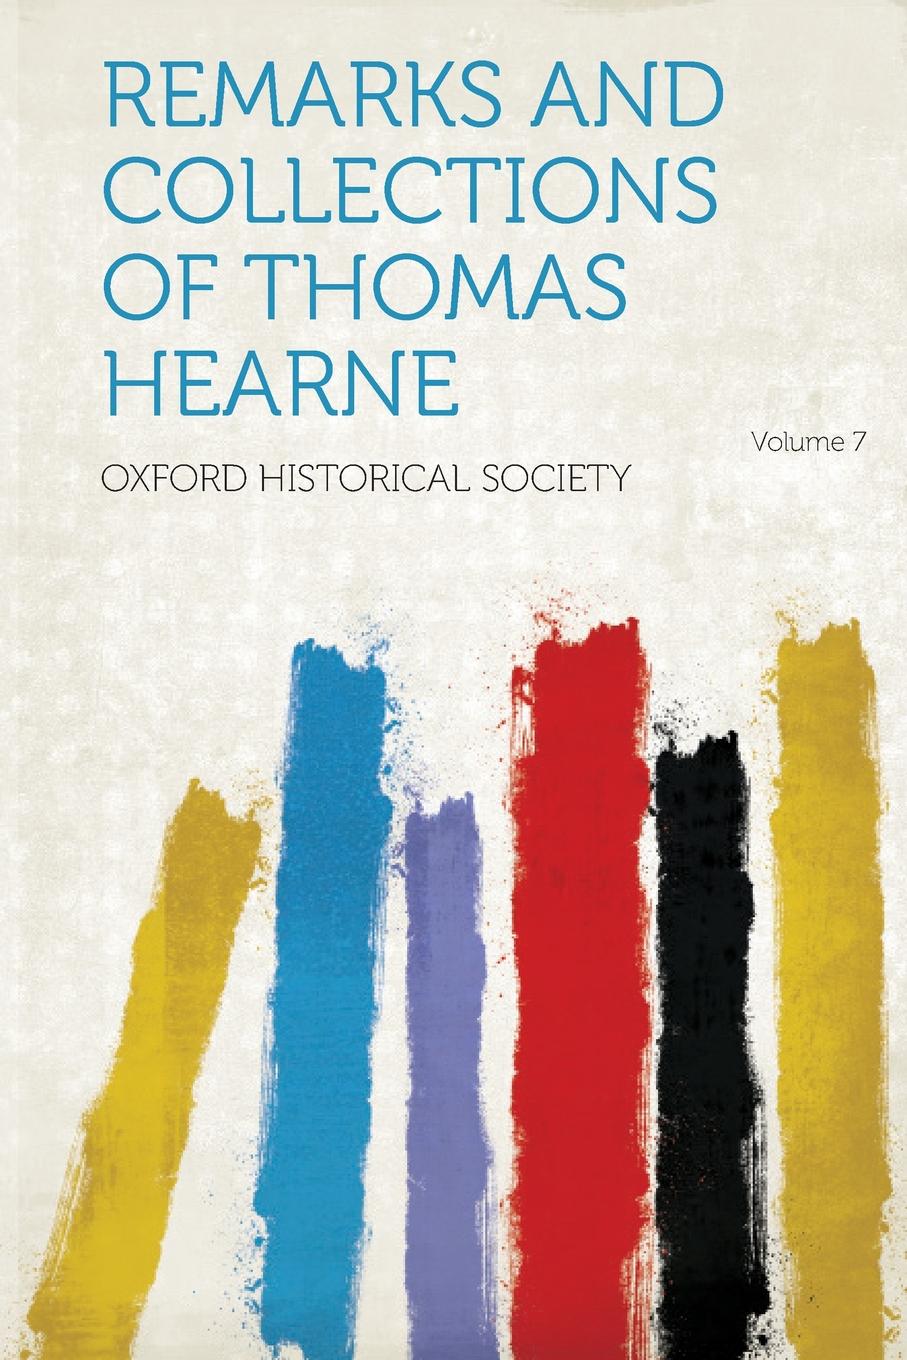 Remarks and Collections of Thomas Hearne Volume 7